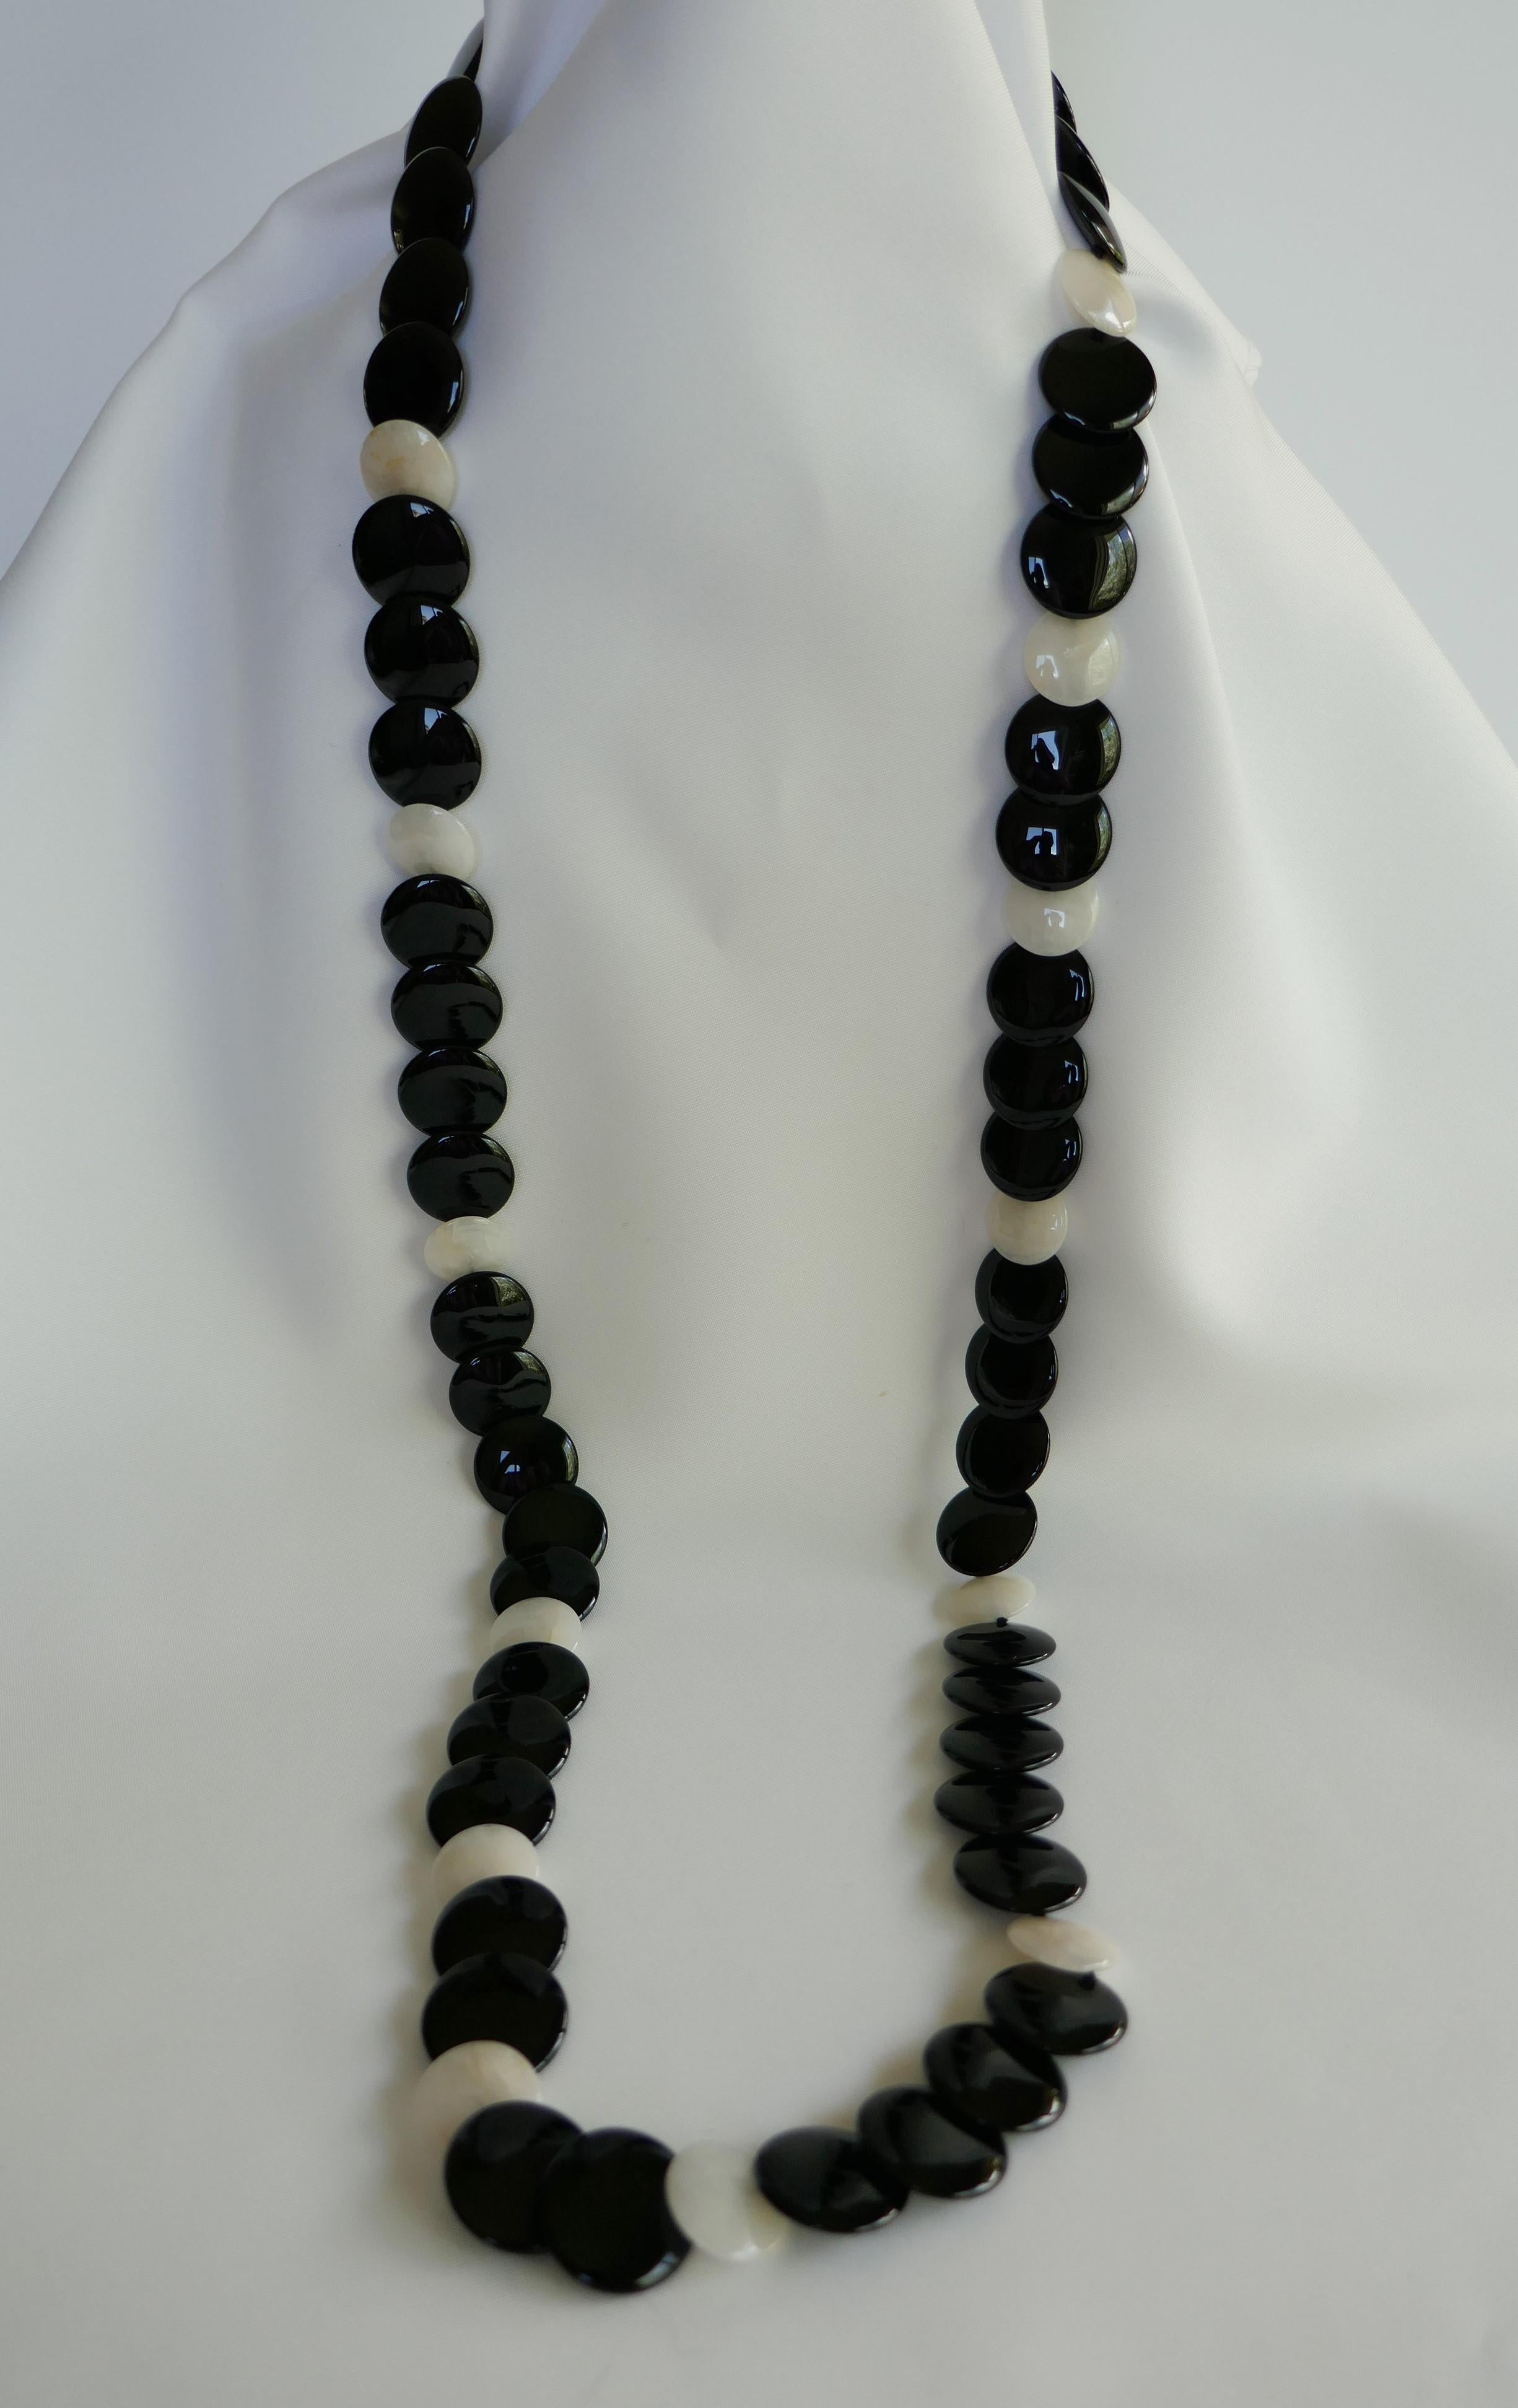 This necklace is long and may also be worn doubled and layered. The onyx is 20mm flat round disks interspersed with 16mm pale yellow jade with 925 vermeil sterling clasp. The necklace is individually knotted on black silk thread and is 41 1/2 inches